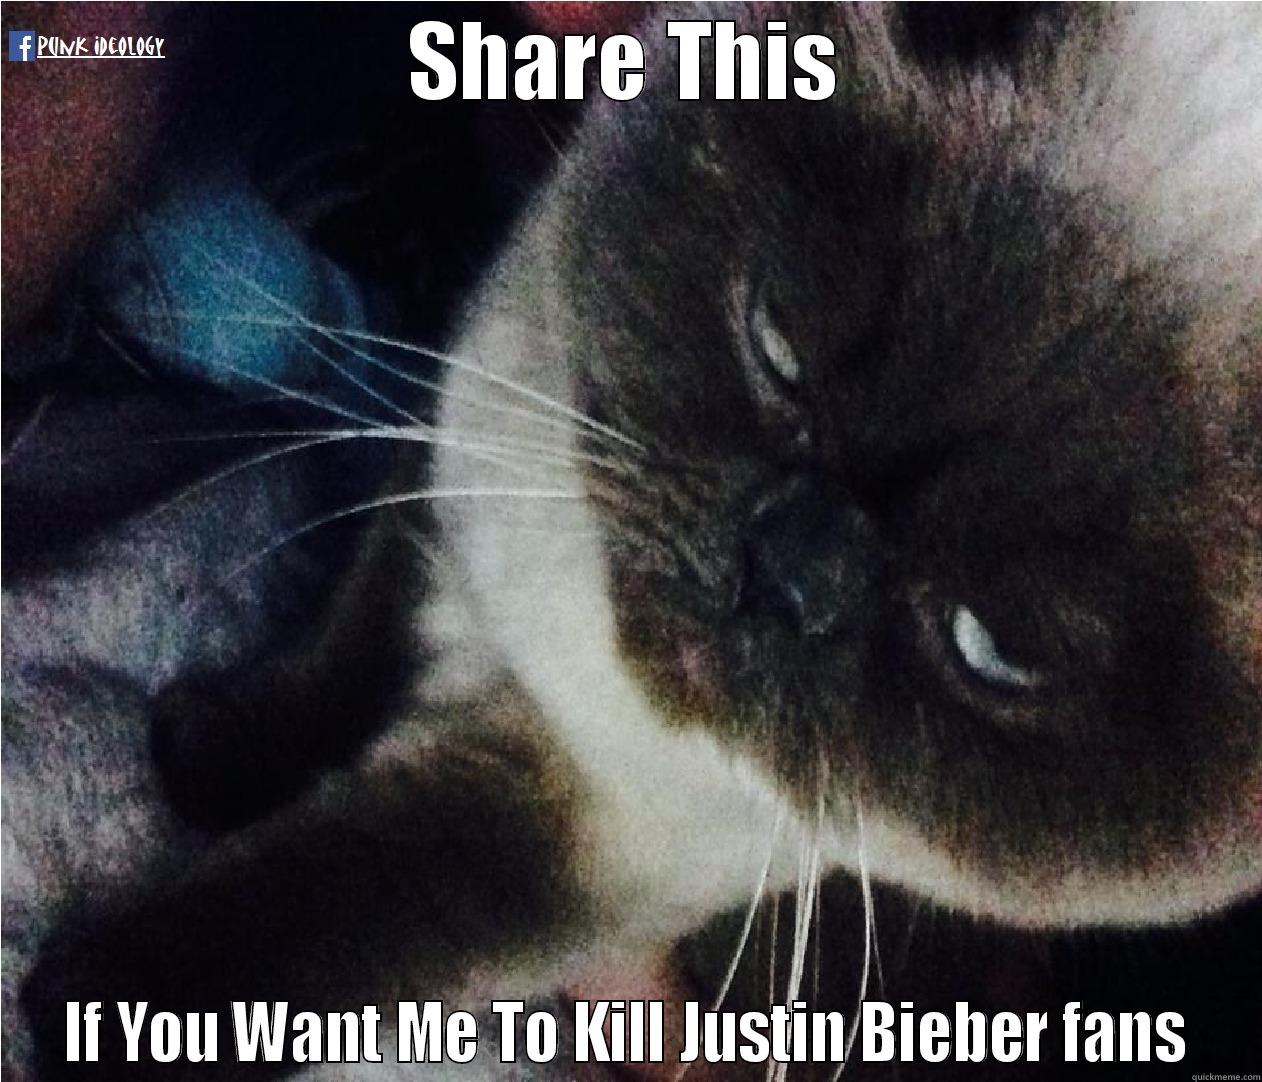 SHARE THIS IF YOU WANT ME TO KILL JUSTIN BIEBER FANS Misc